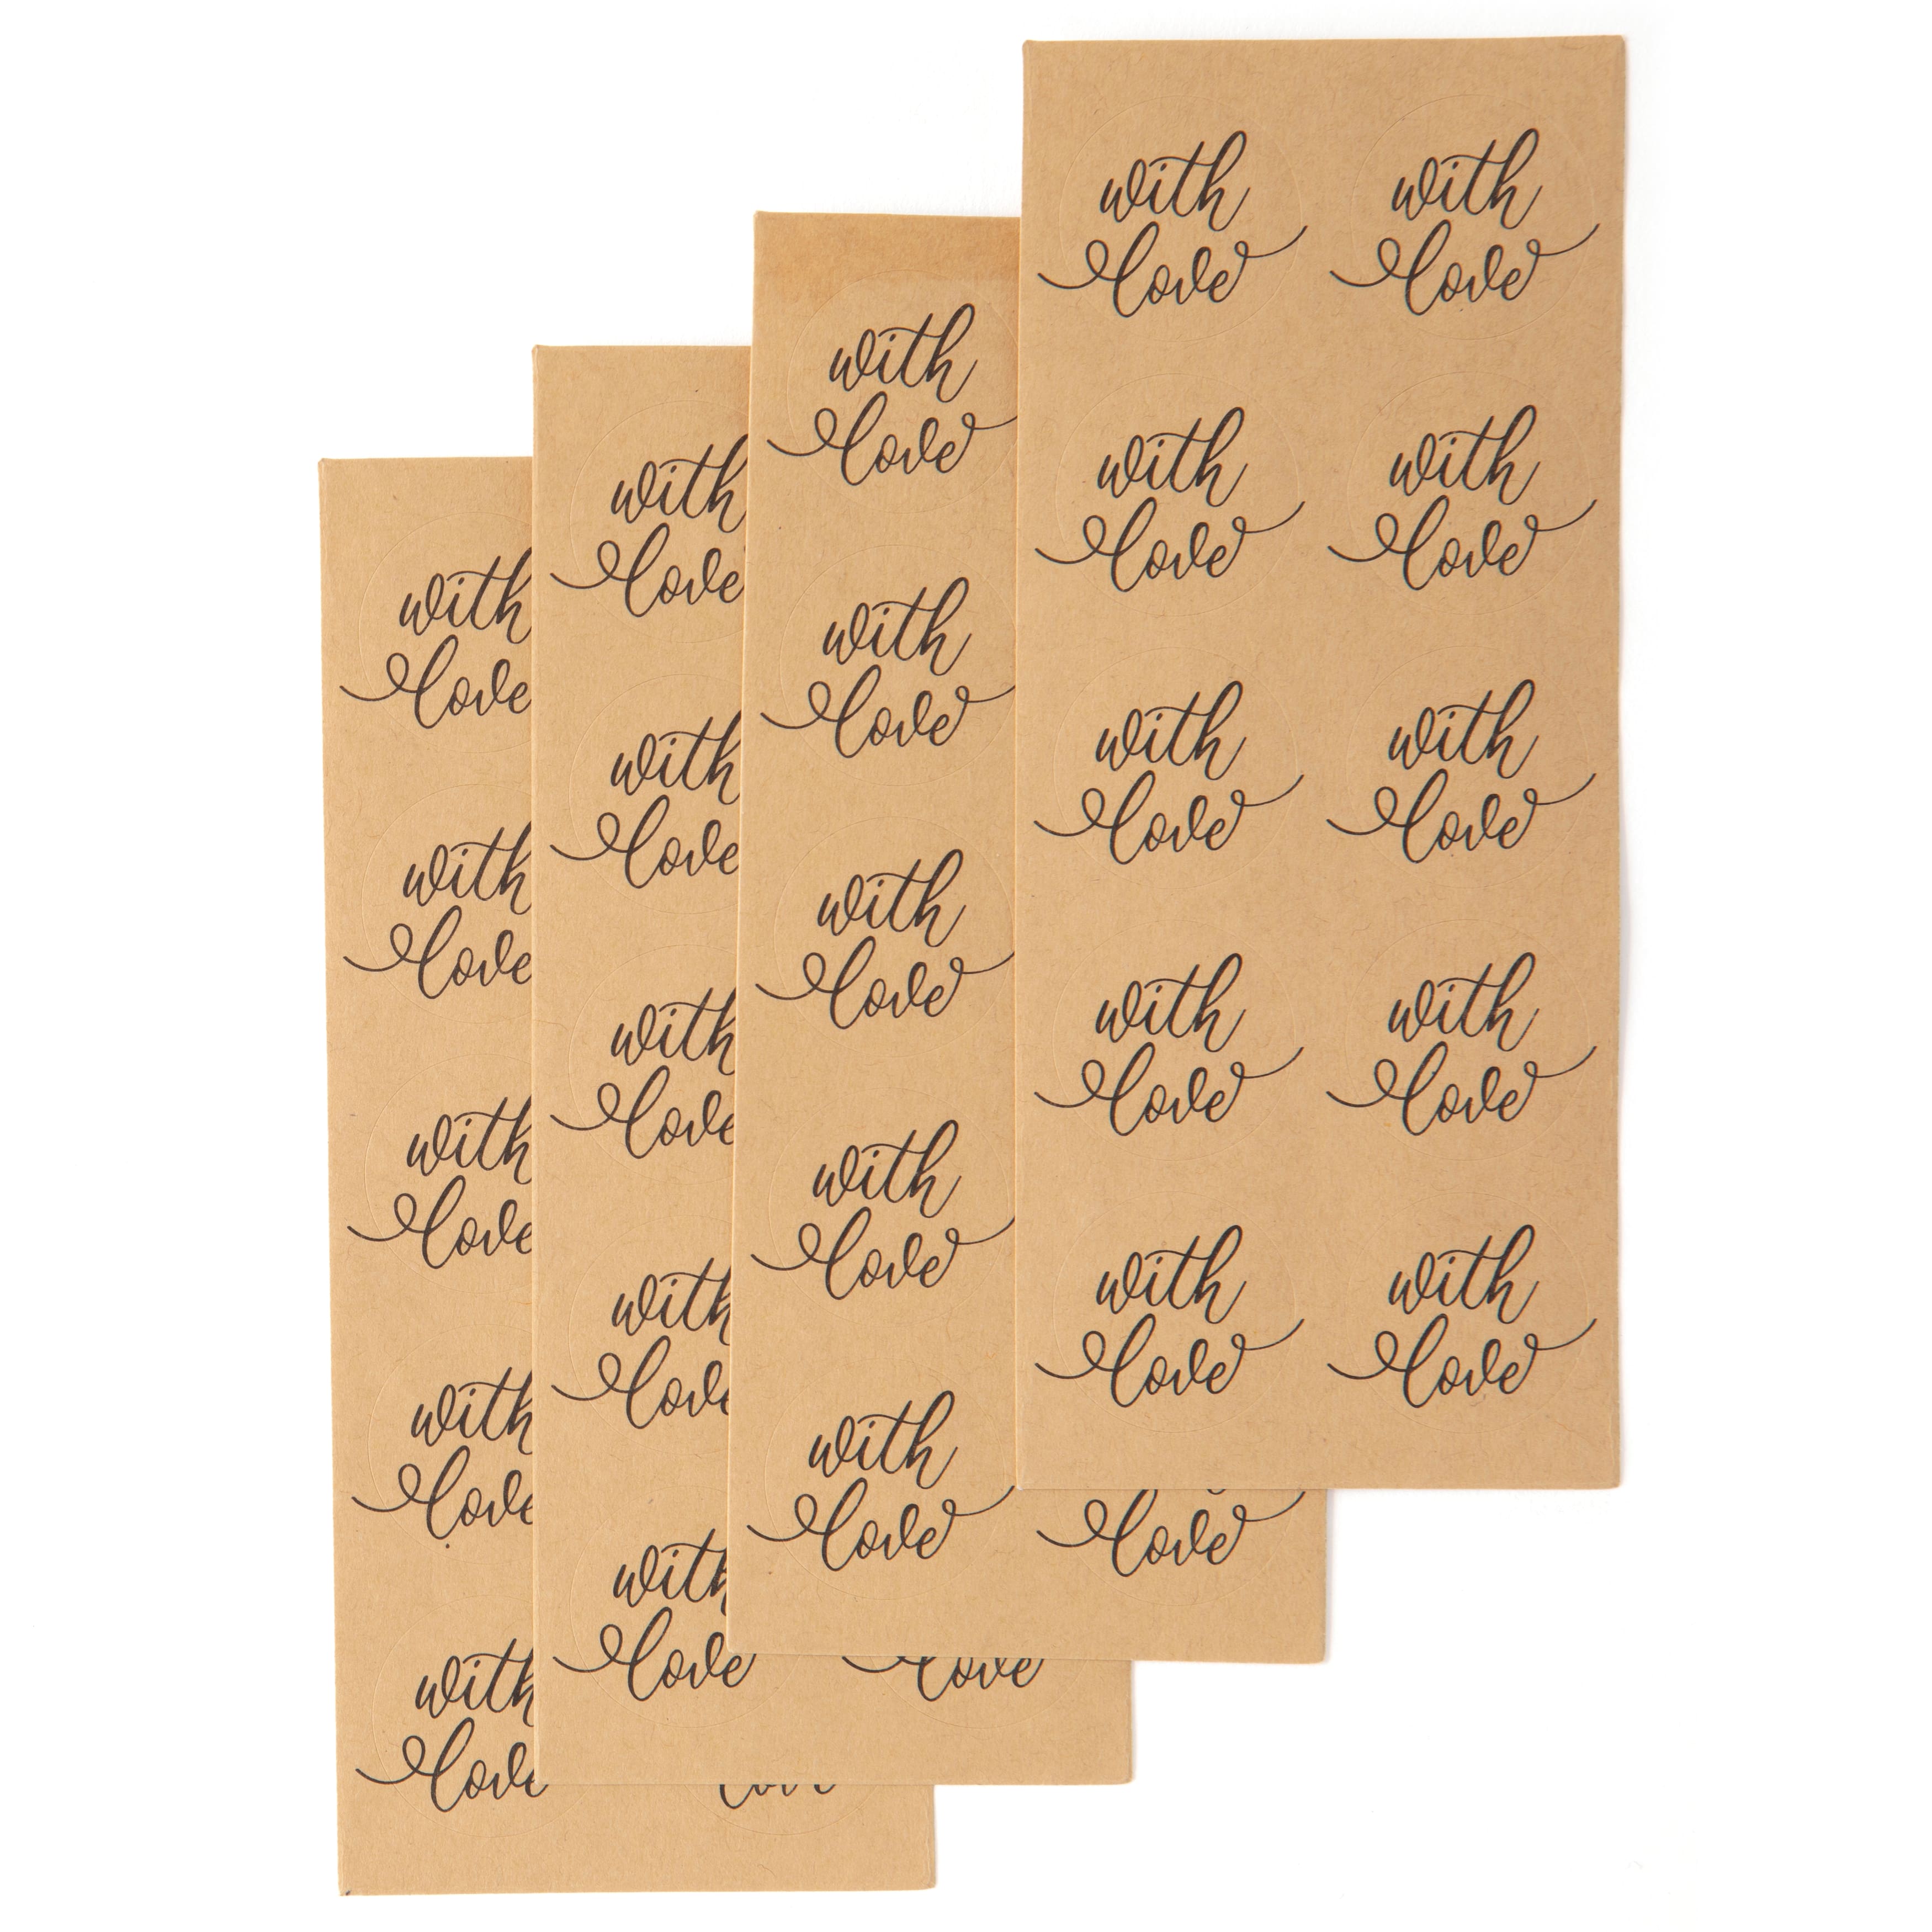 With Love Envelope Seals by Recollections™